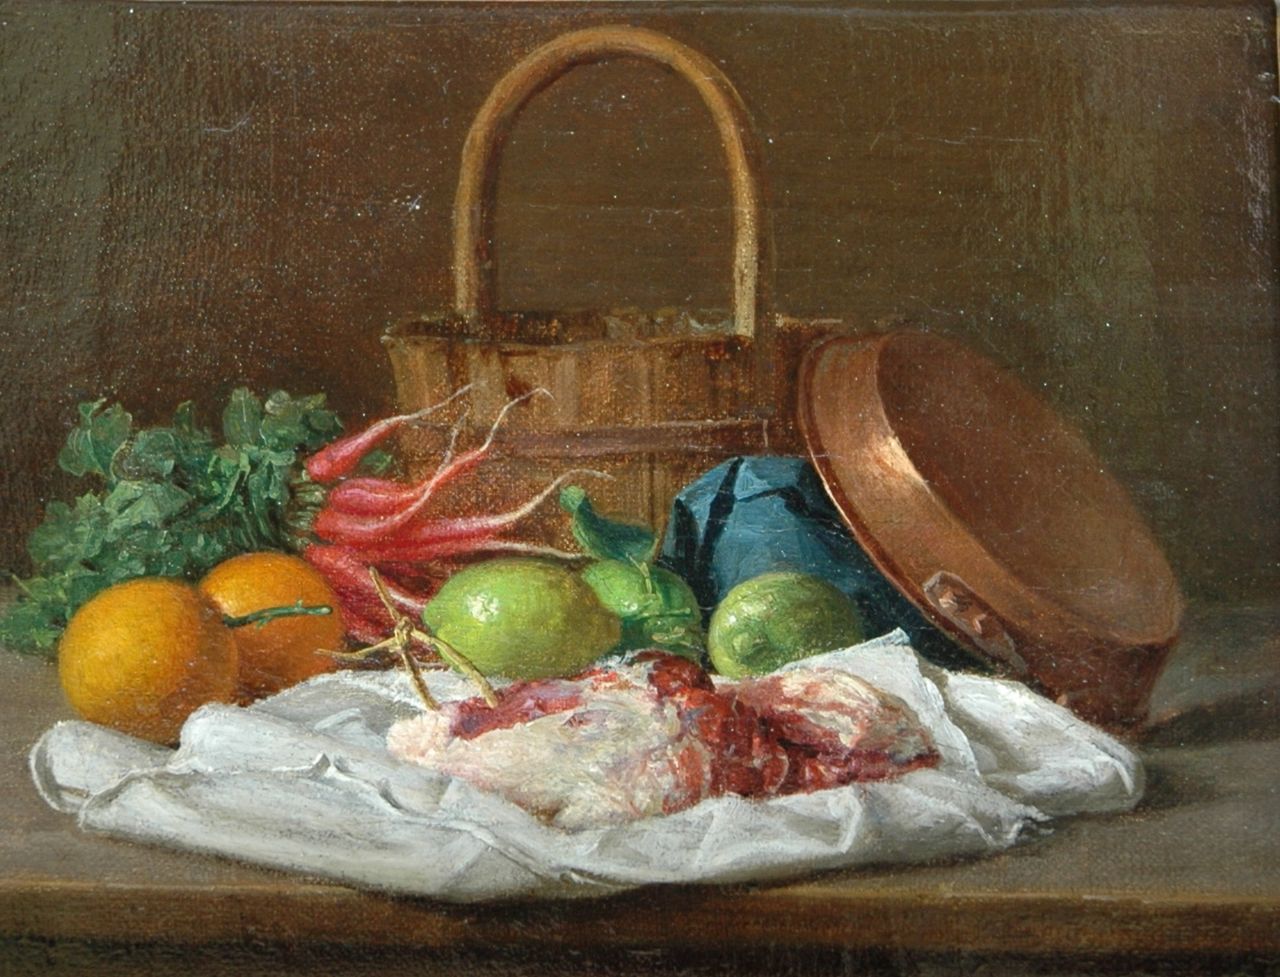 Duitse School, 19 eeuw   | Duitse School, 19 eeuw, A still life with radish and meat, oil on canvas 14.8 x 19.6 cm, signed l.l. with the initials 'D.N.'